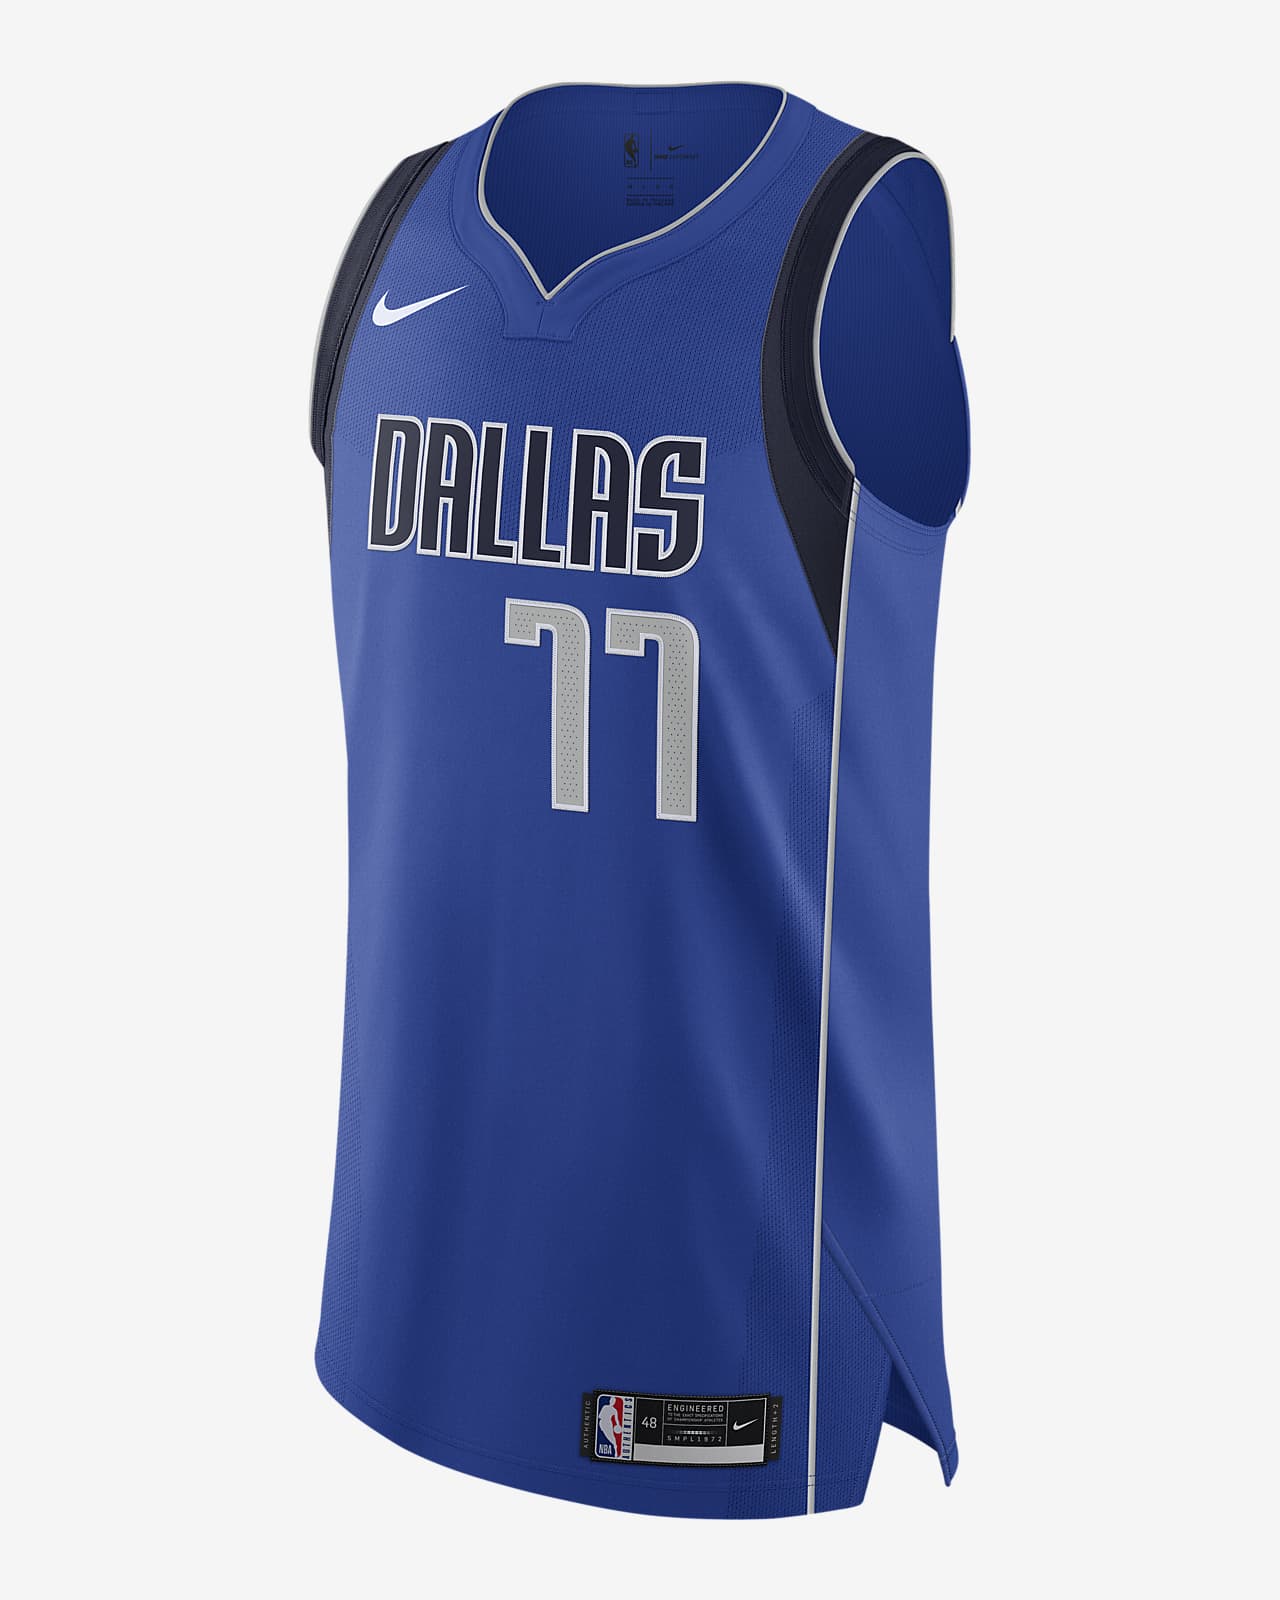 luka doncic jersey stitched